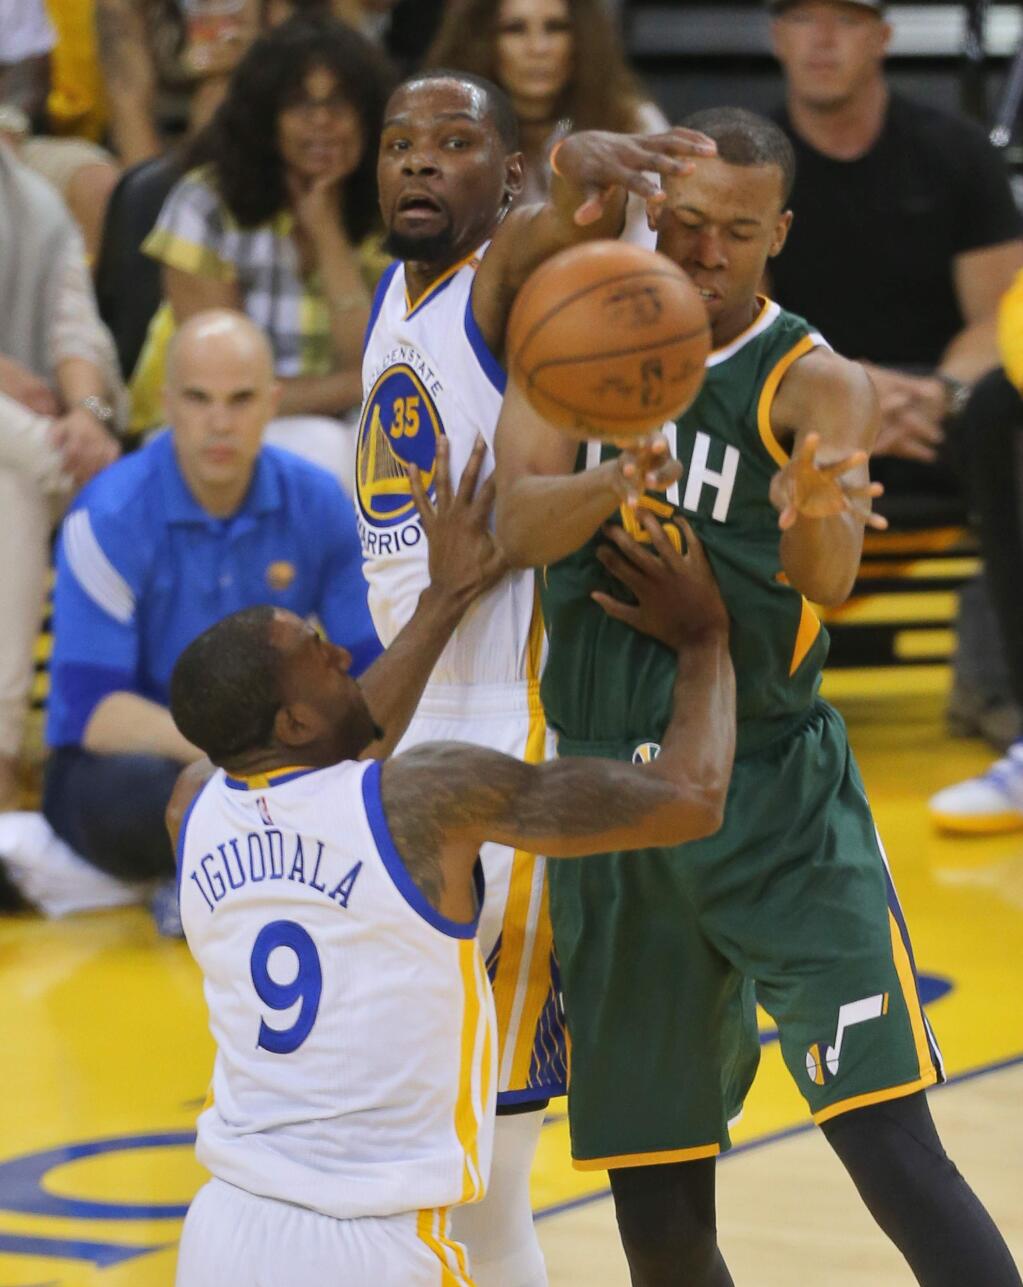 Golden State Warriors forward Kevin Durant and forward Andre Iguodala strip the ball from Utah Jazz guard Rodney Hood during Game 1 of the of NBA Western Conference Semifinals in Oakland on Tuesday, May 2, 2017. (Christopher Chung/ The Press Democrat)